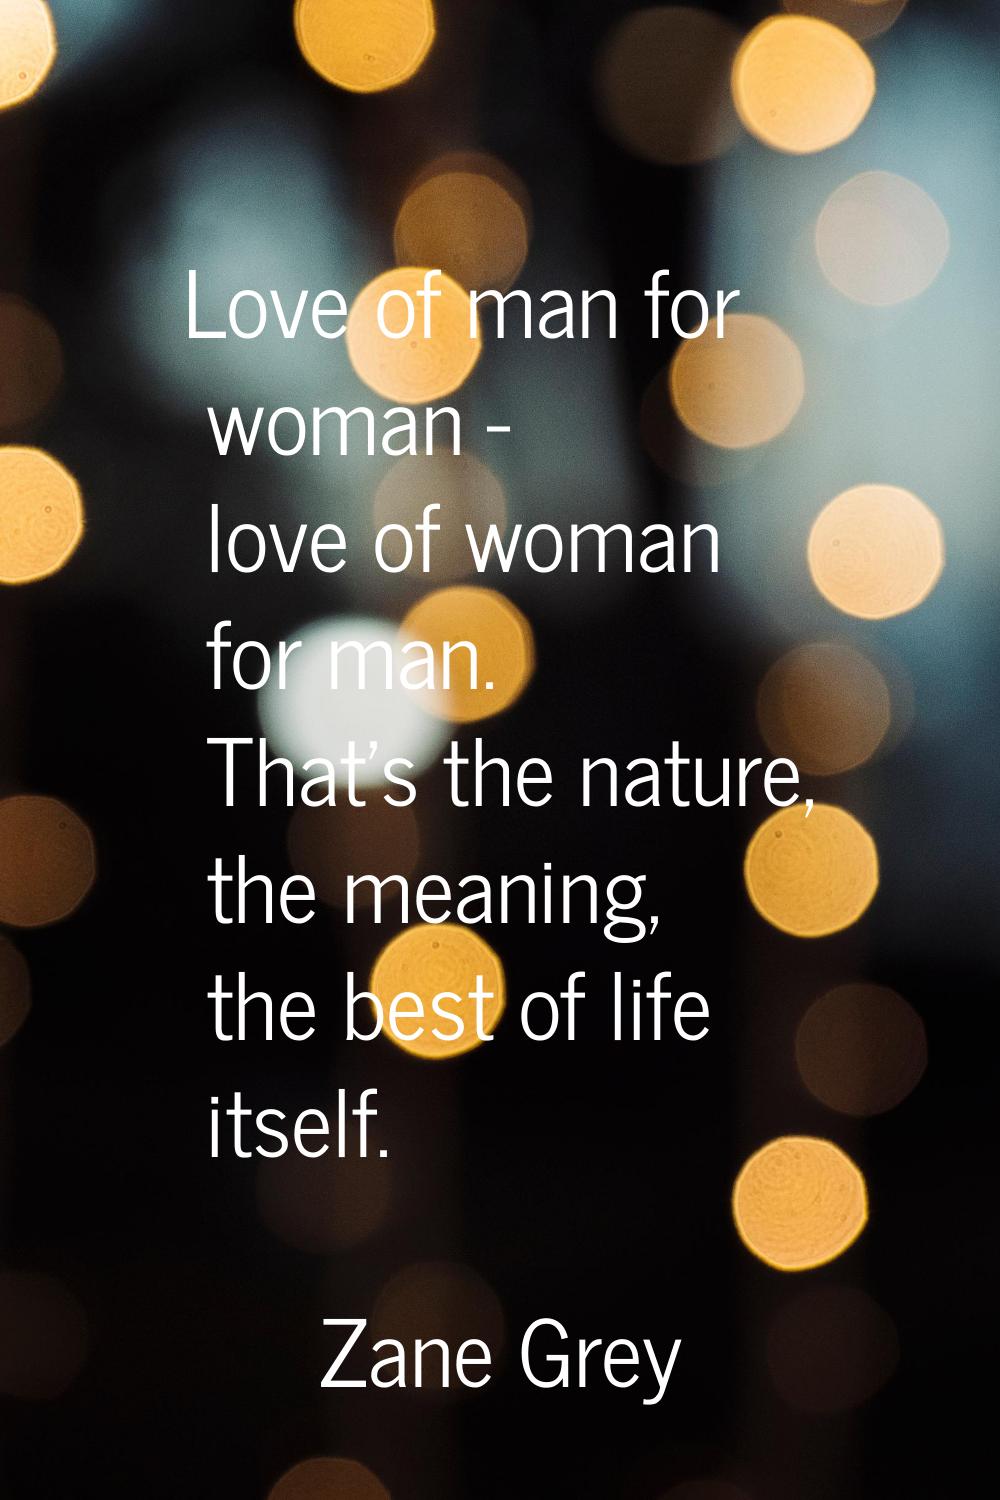 Love of man for woman - love of woman for man. That's the nature, the meaning, the best of life its